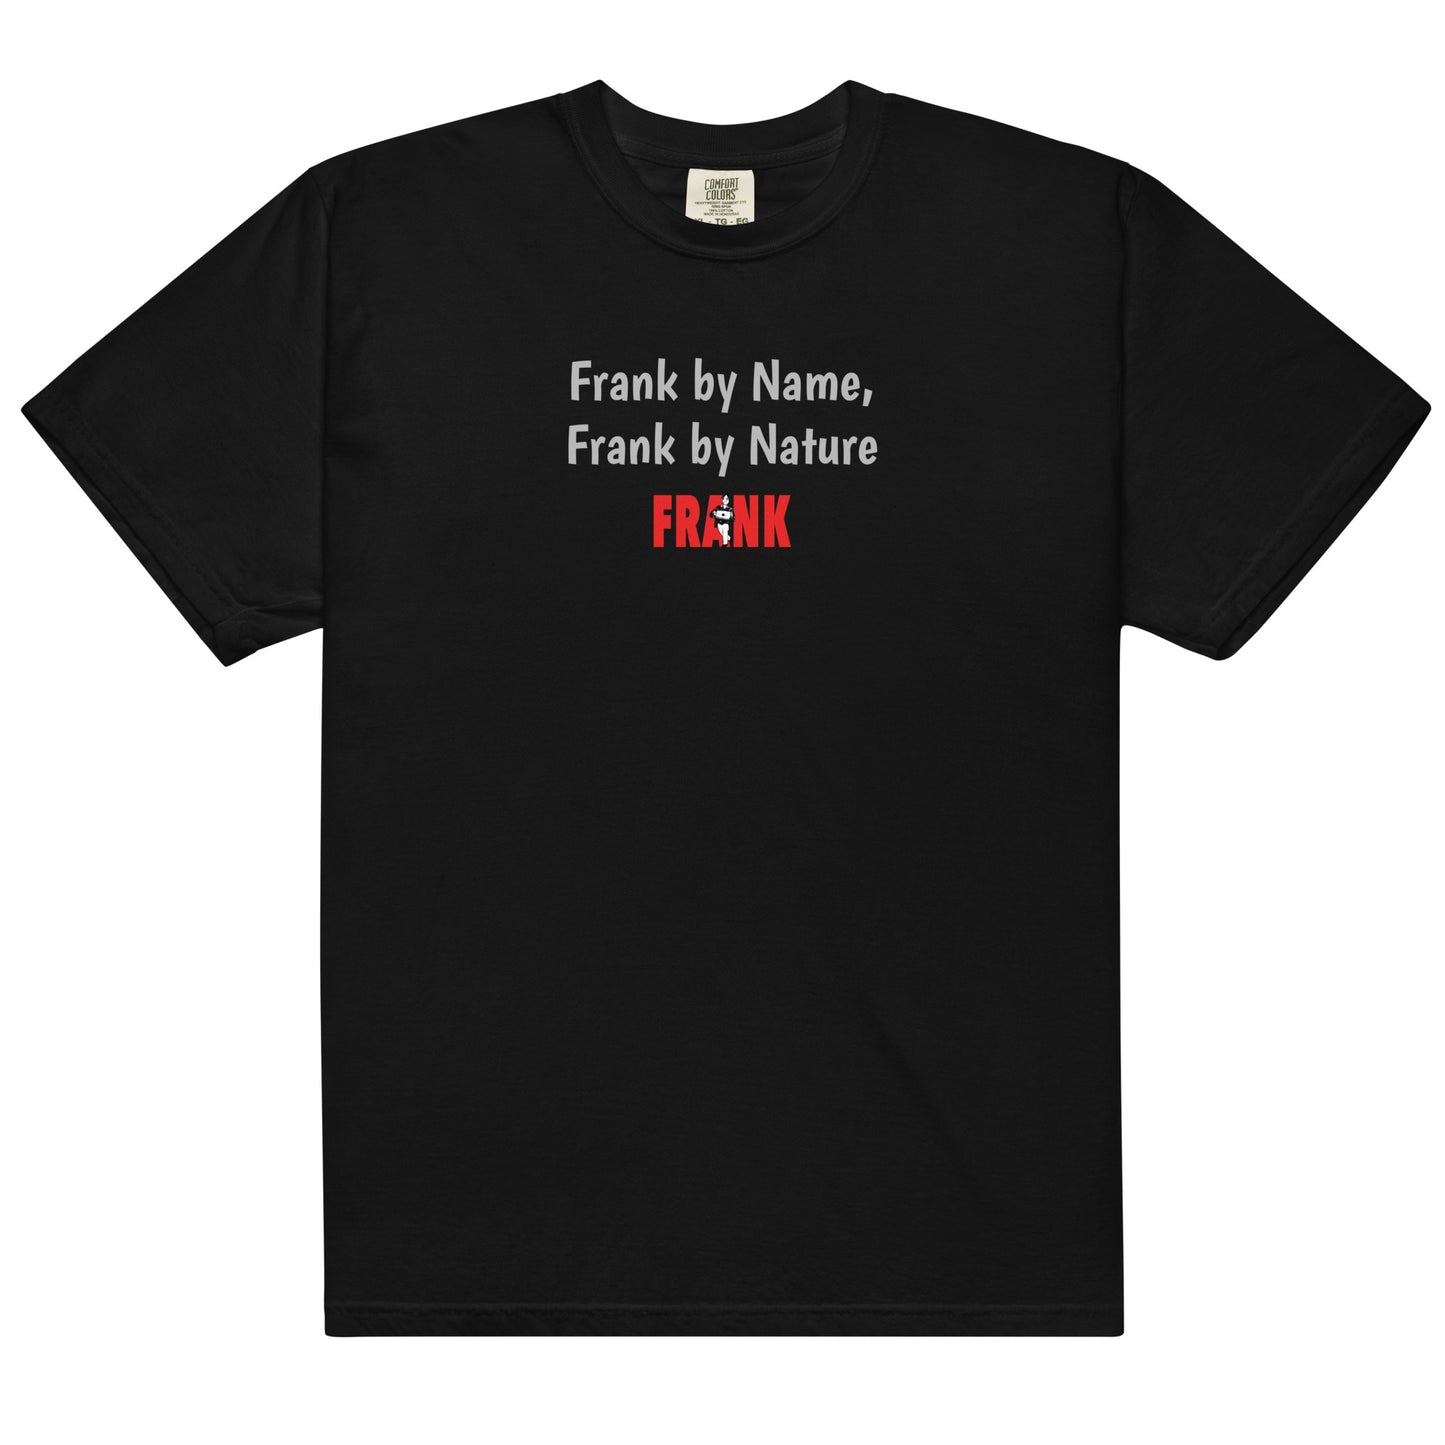 Frank By Name, Frank By Nature Men’s garment-dyed heavyweight t-shirt